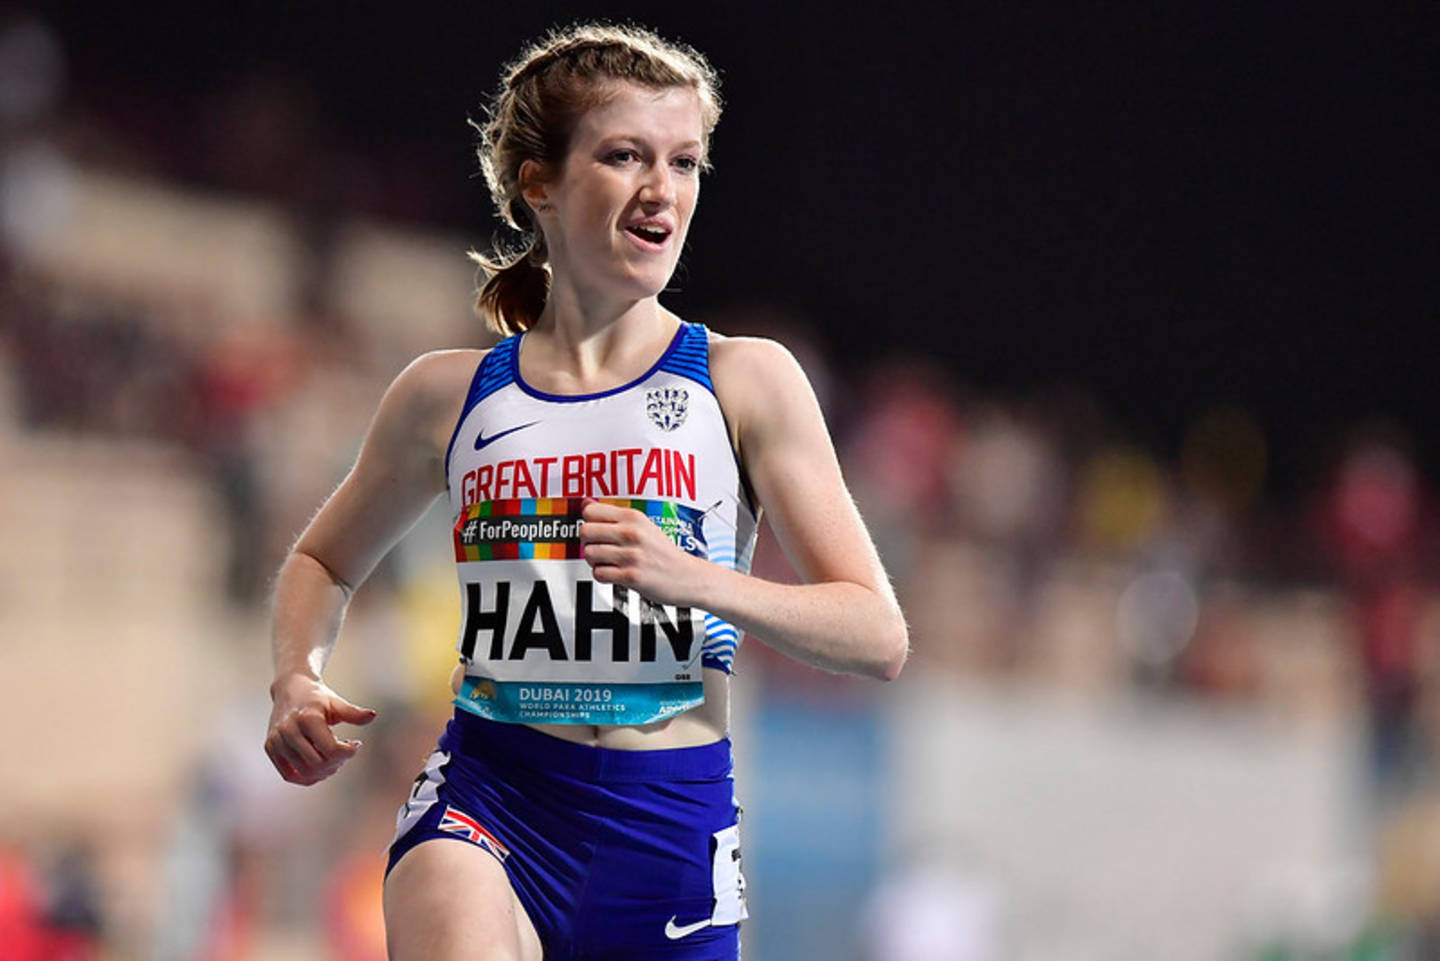 Sophie Hahn sprints to victory in T38 100m final at World Para Athletics Championships 2019